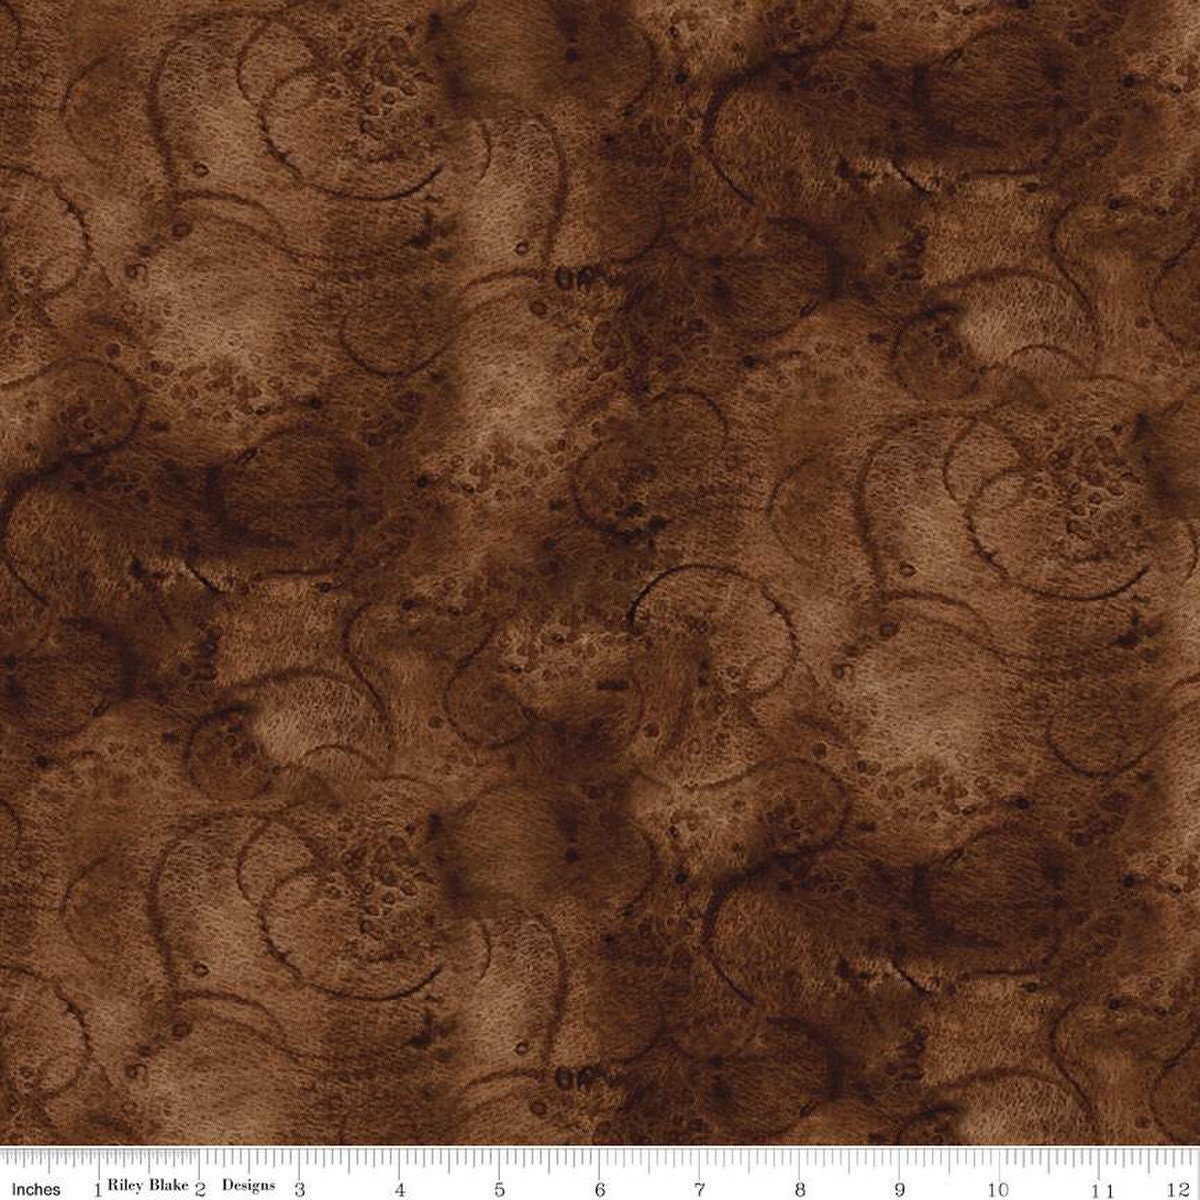 Painter's Watercolor Swirl Warm Sepia Fabric - Riley Blake Designs C680-WARMSEPIA, Warm Brown Blender Fabric by the Yard